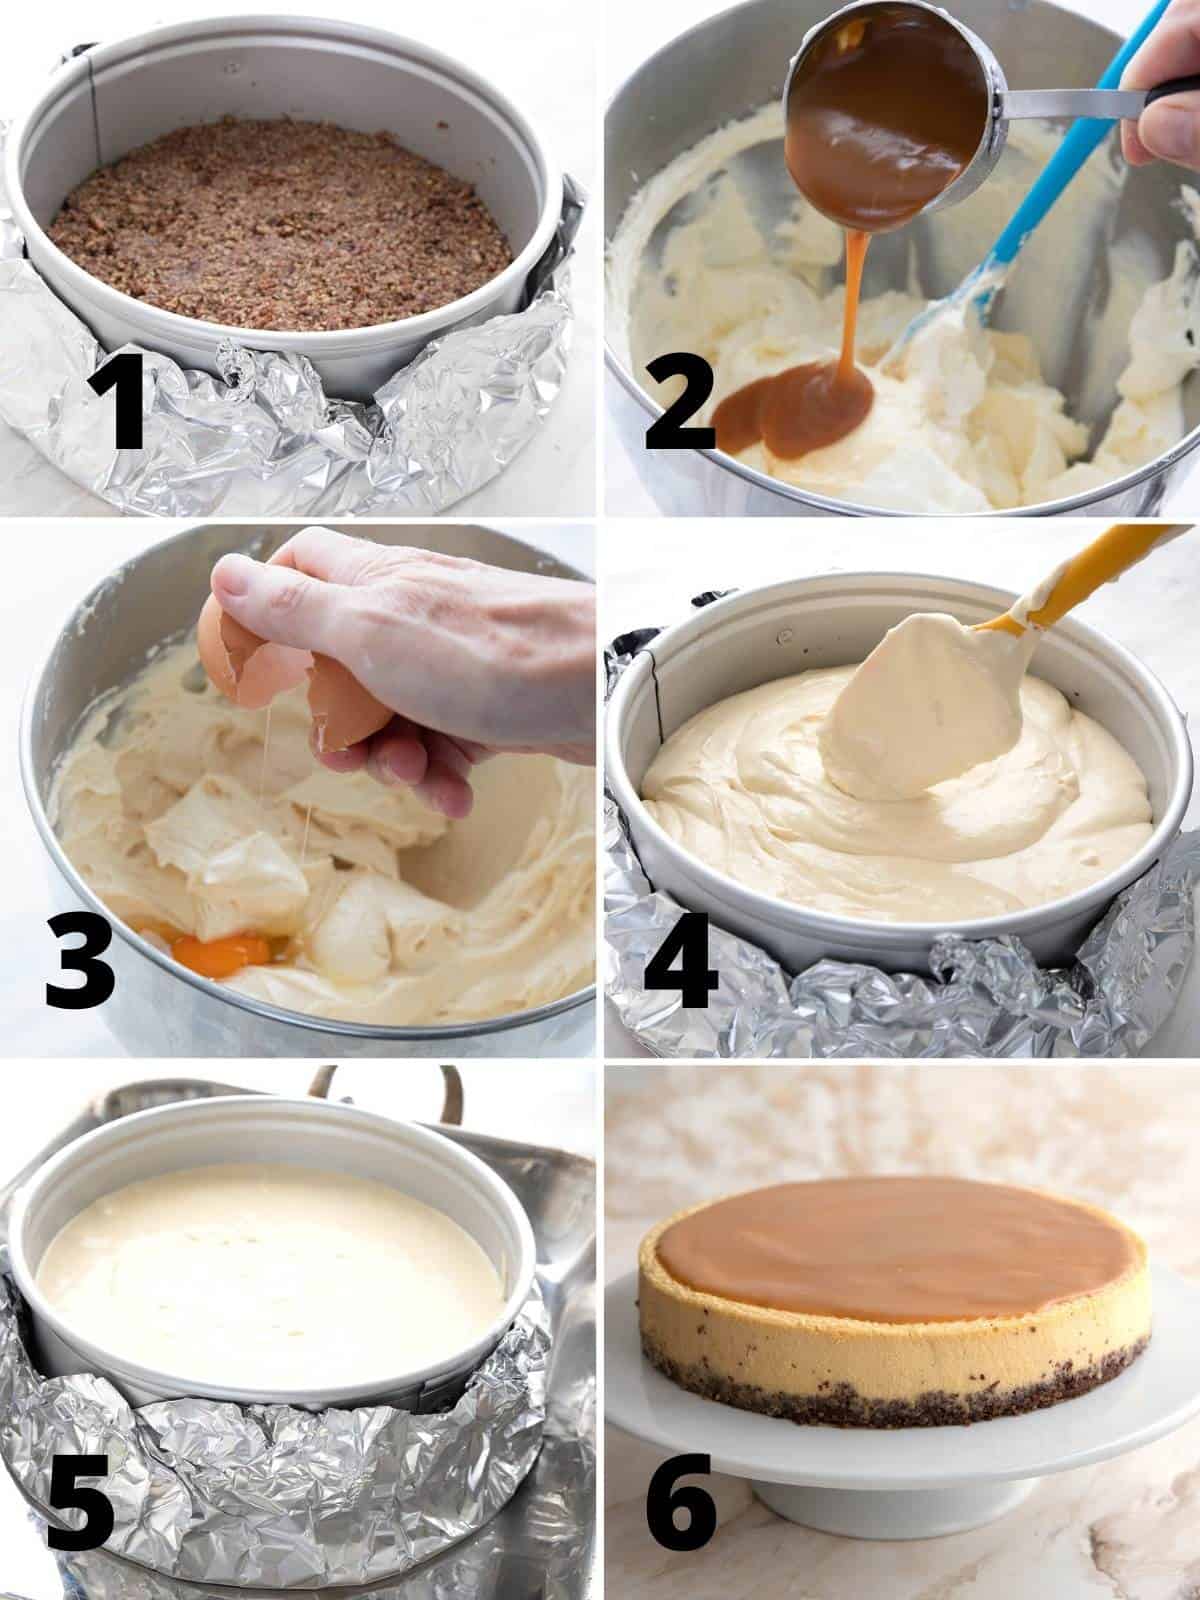 A collage of 6 images showing how to make Dulce de Leche Cheesecake.